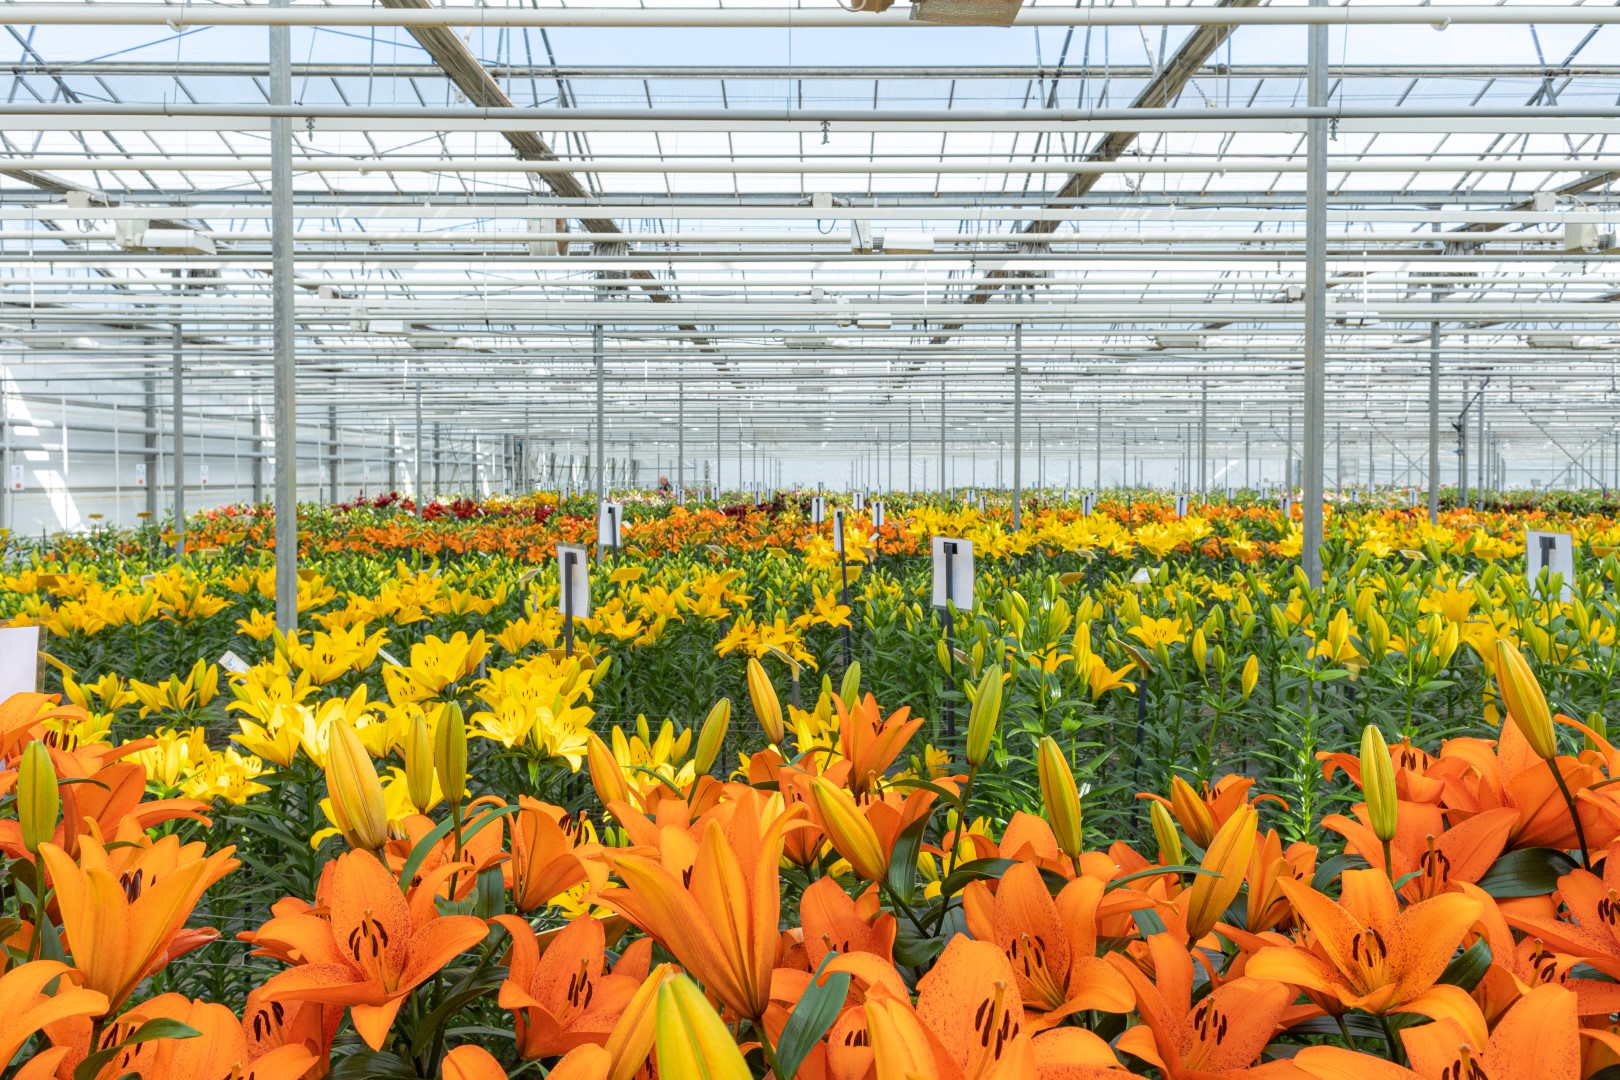 Bright orange and yellow lilies in the greenhouse under the warm sunshine.